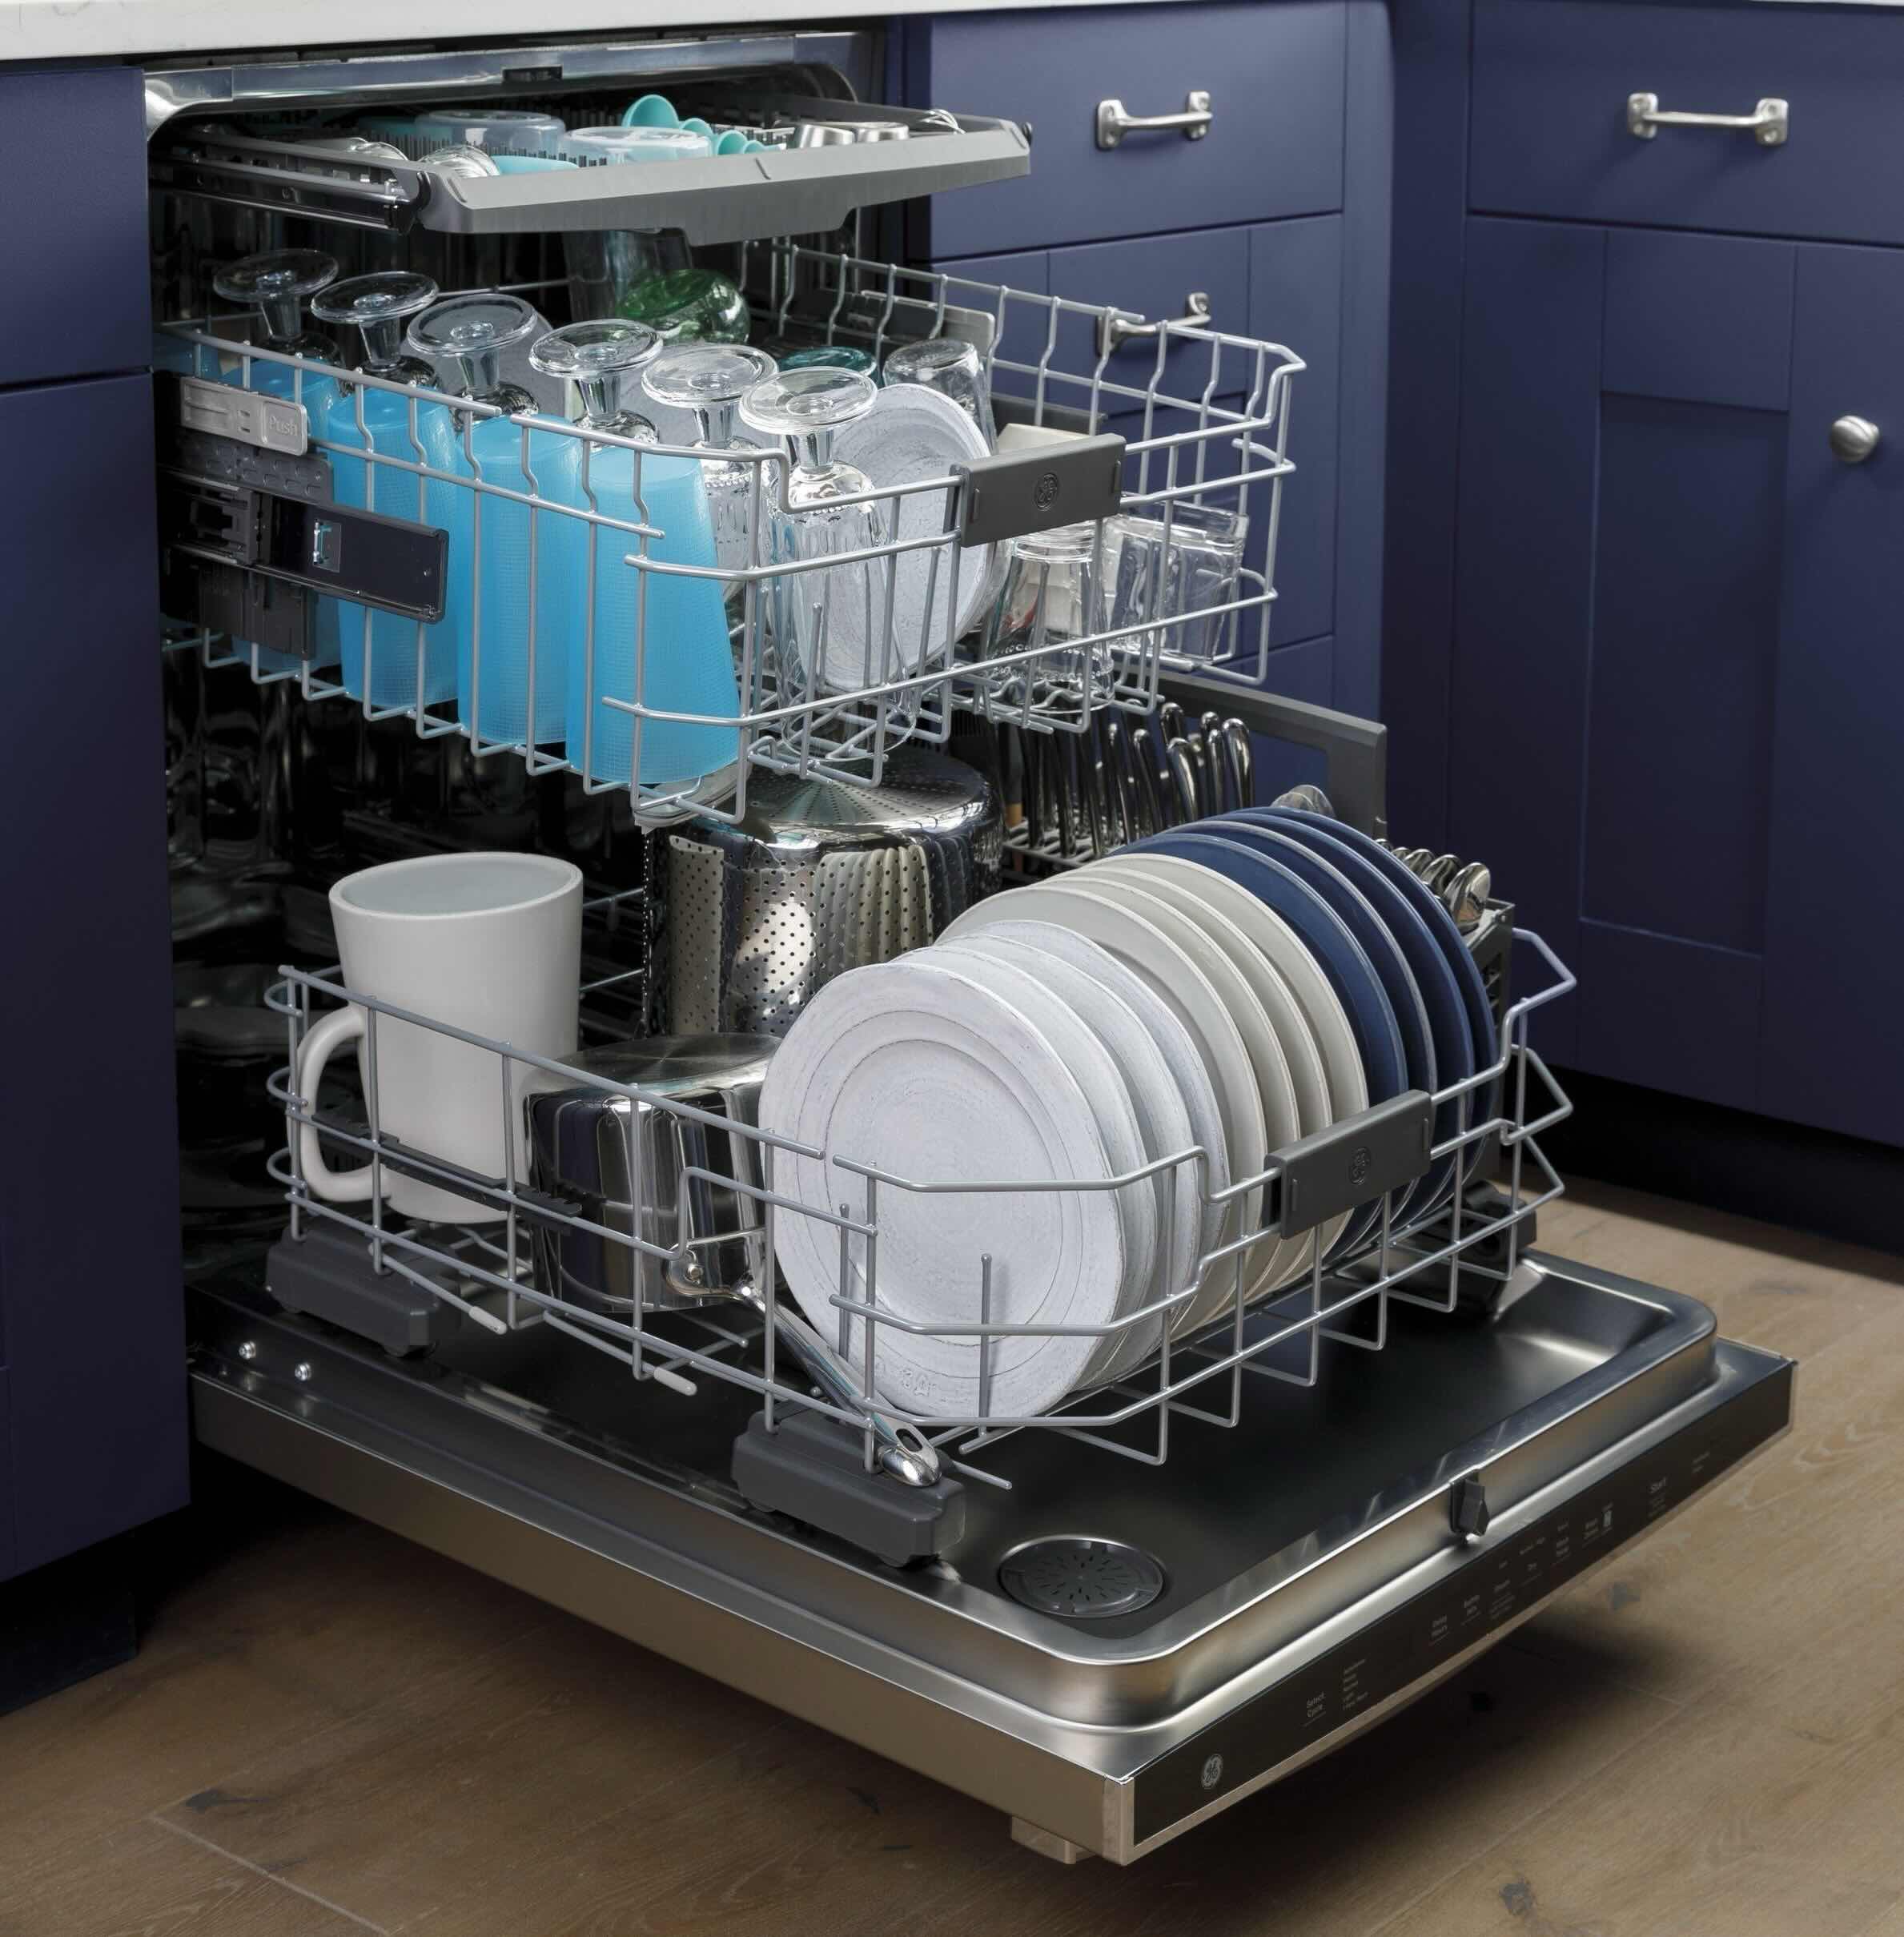 How To Fix The Error Code CA For GE Dishwasher